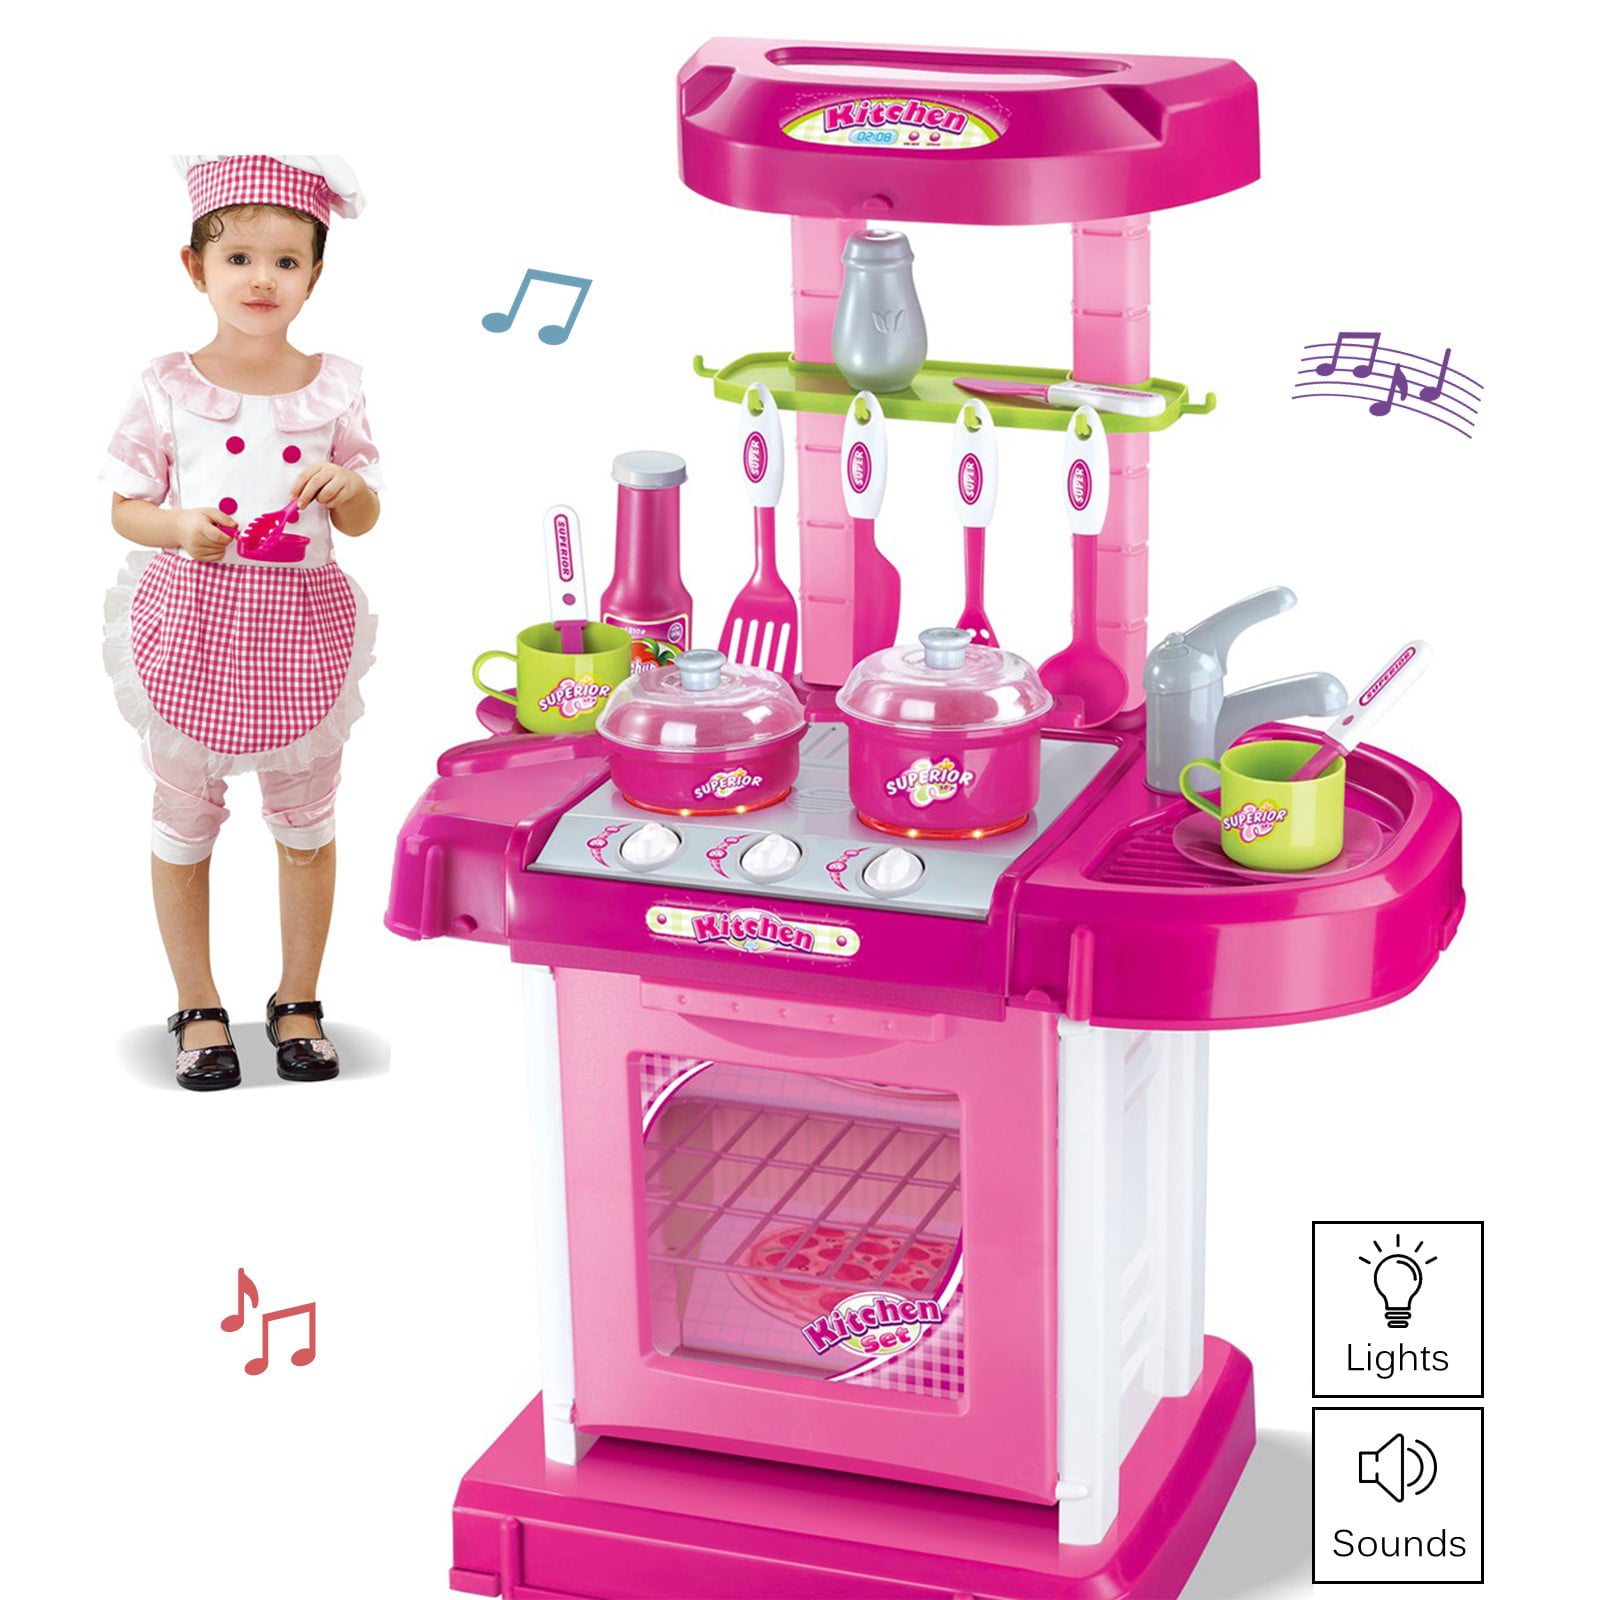 24" Beauty Kitchen Appliance Cooking Toy Play Set Children Lights & Sound TF826 